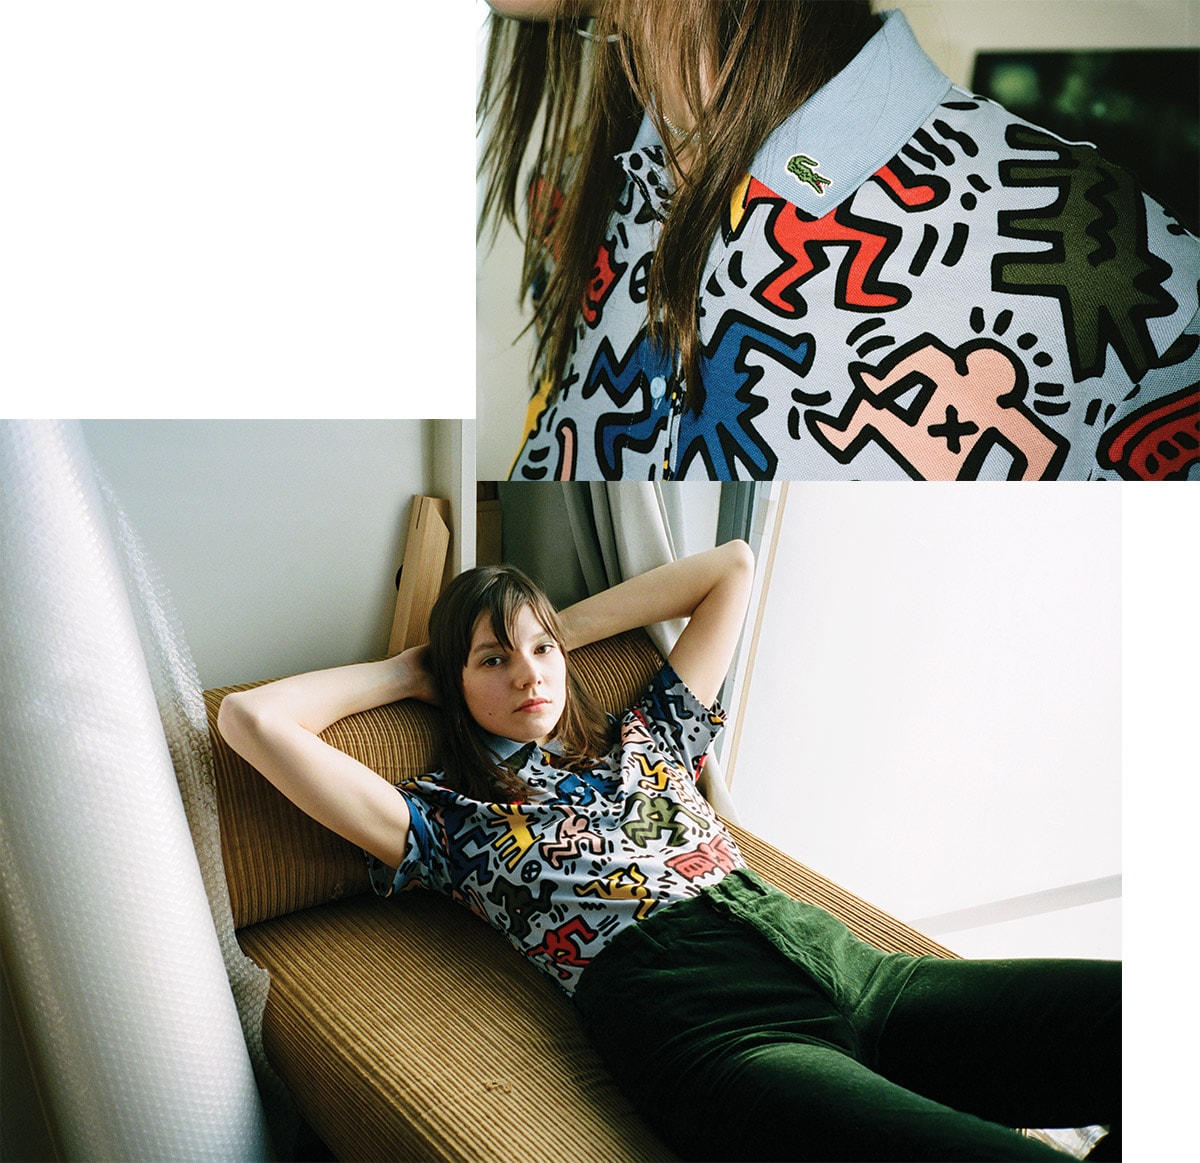 lacoste drop keith haring collaboration collection keith haring foundation